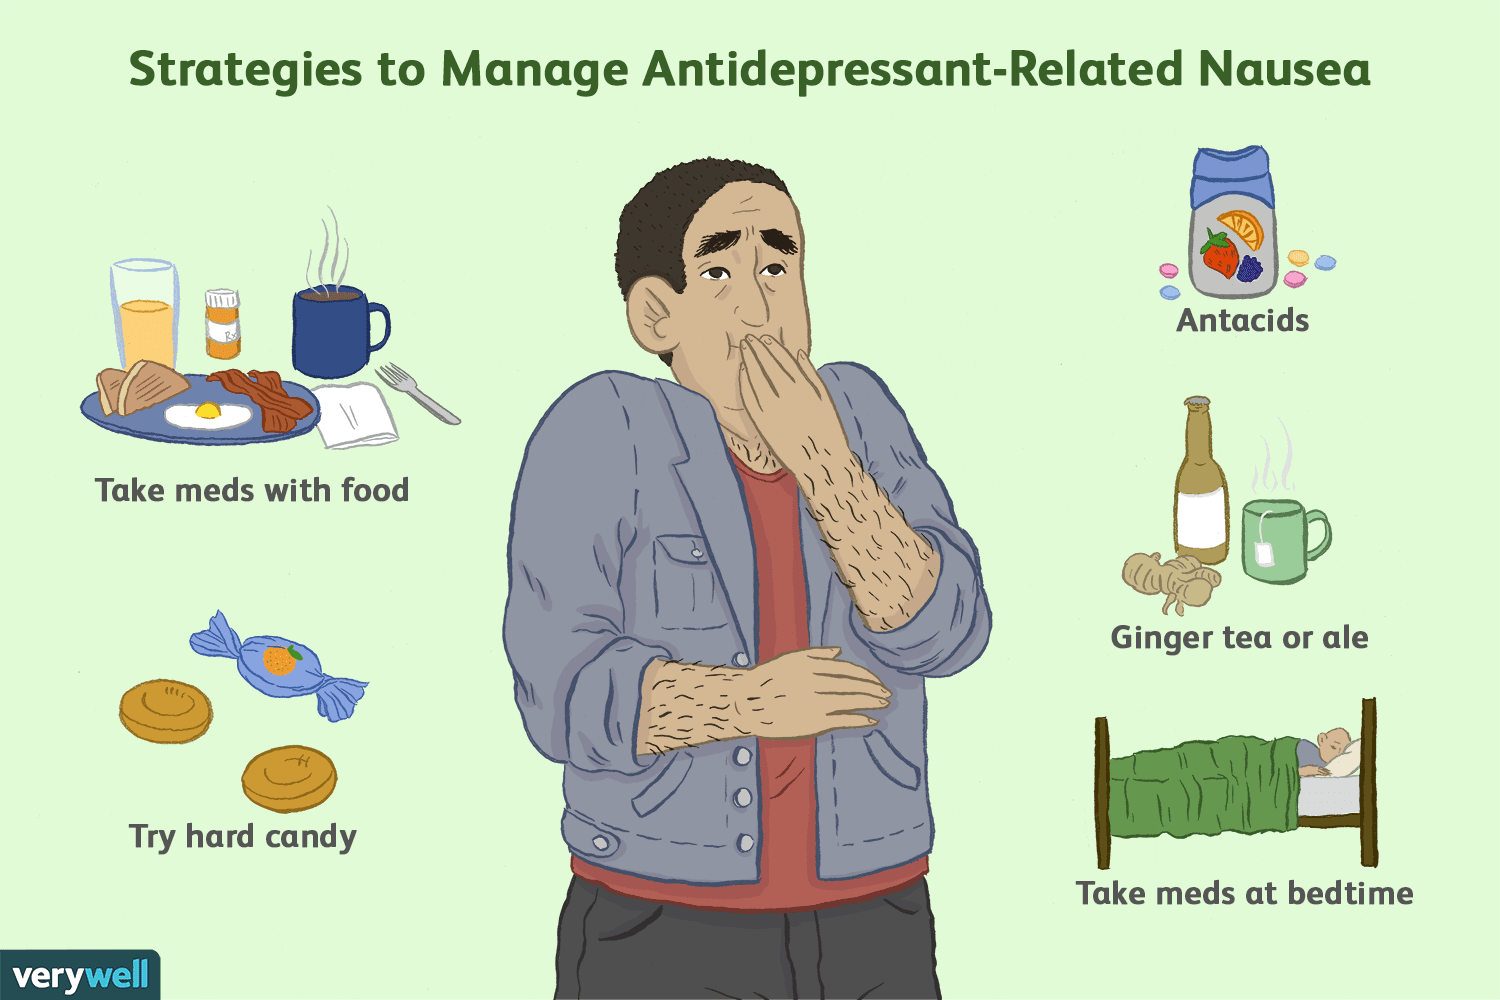 Tips for Coping With Nausea While on Antidepressants